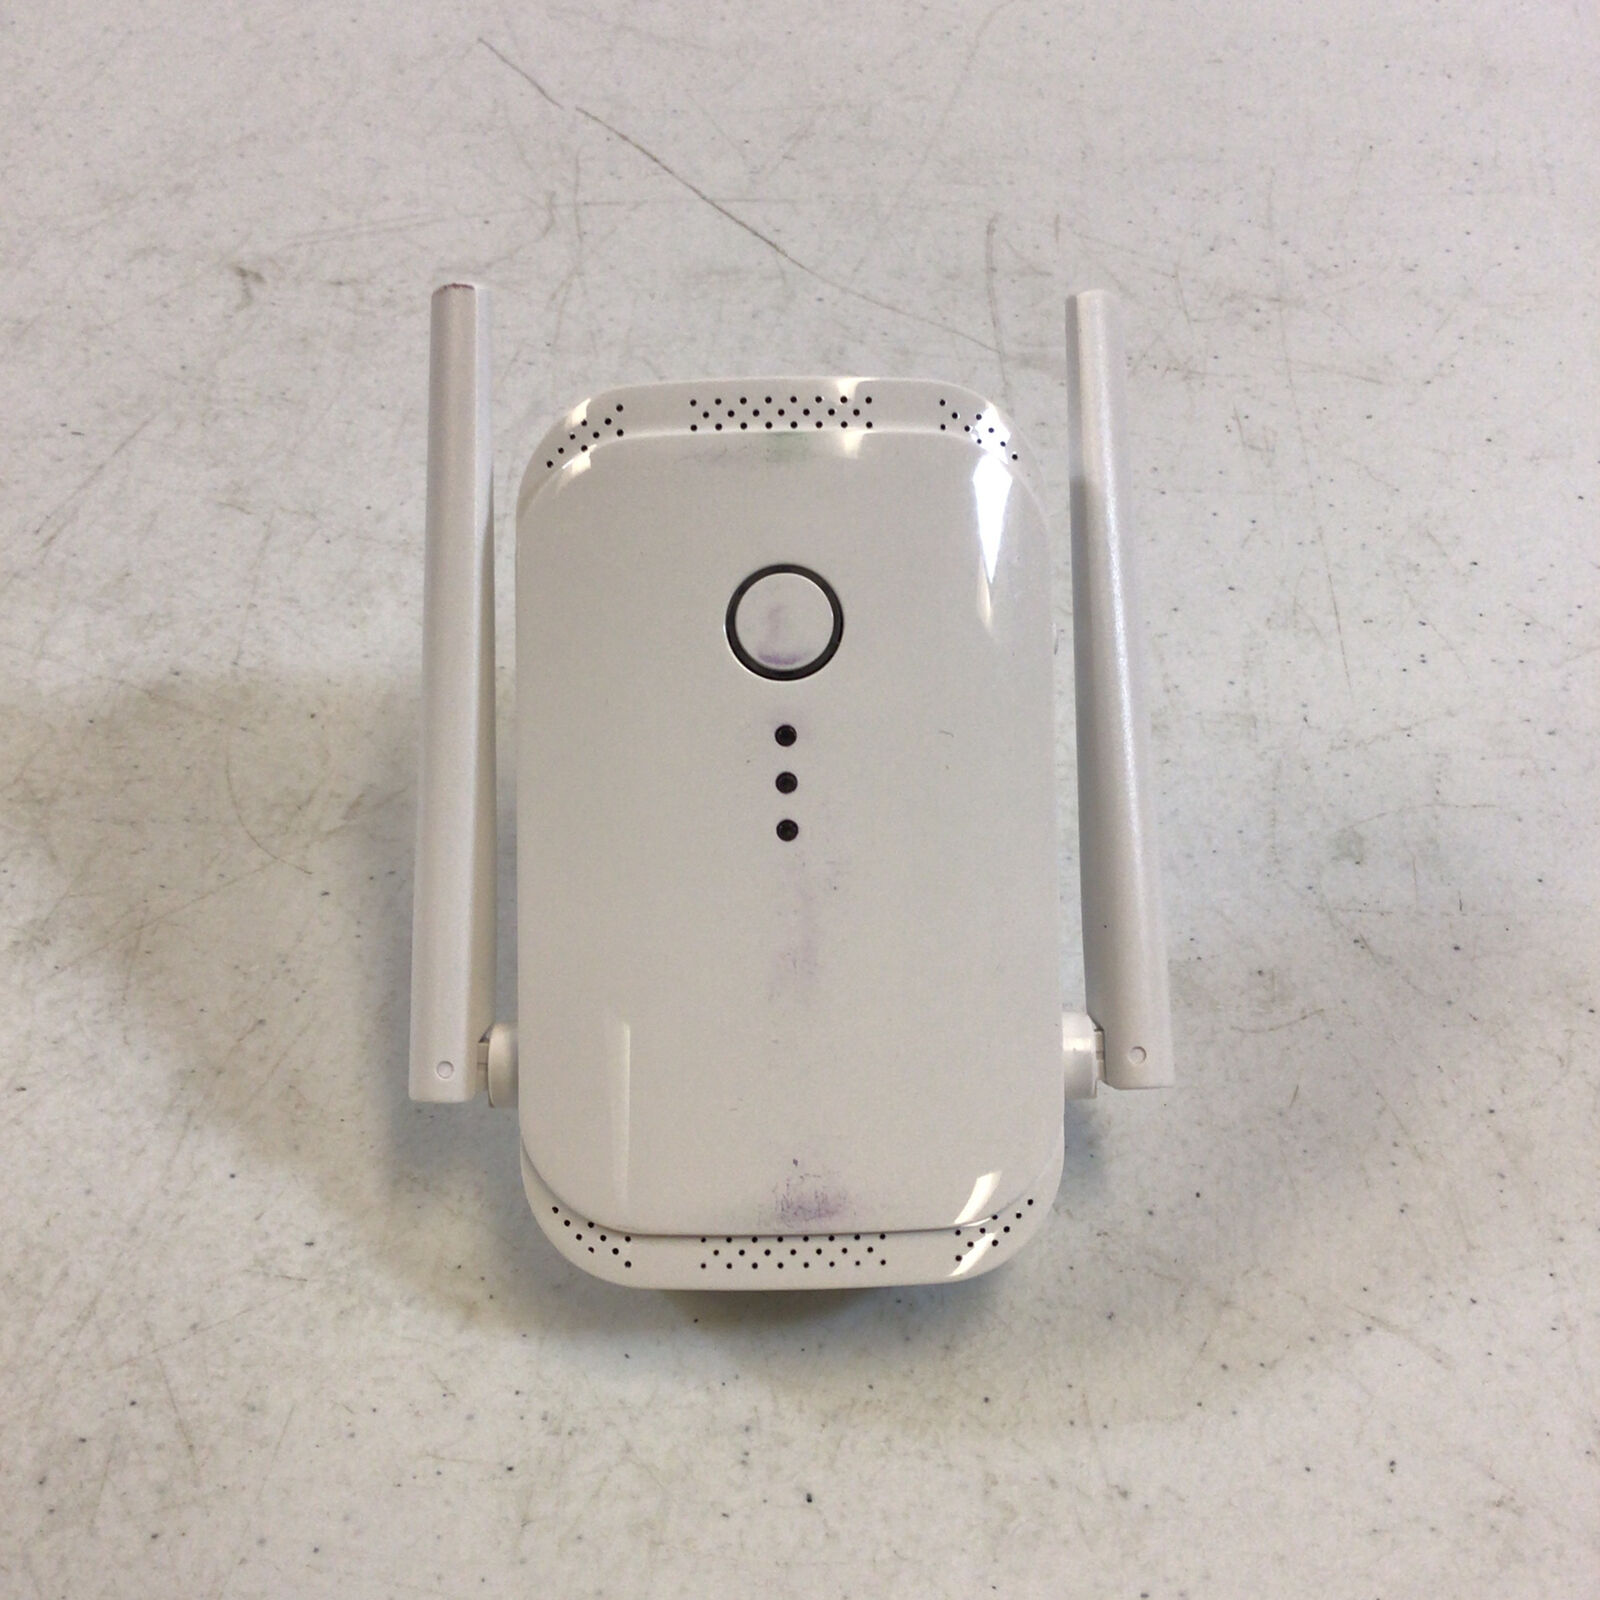 Macard N300 White High Speed Wireless WiFi Signal Range Booster Extender Used